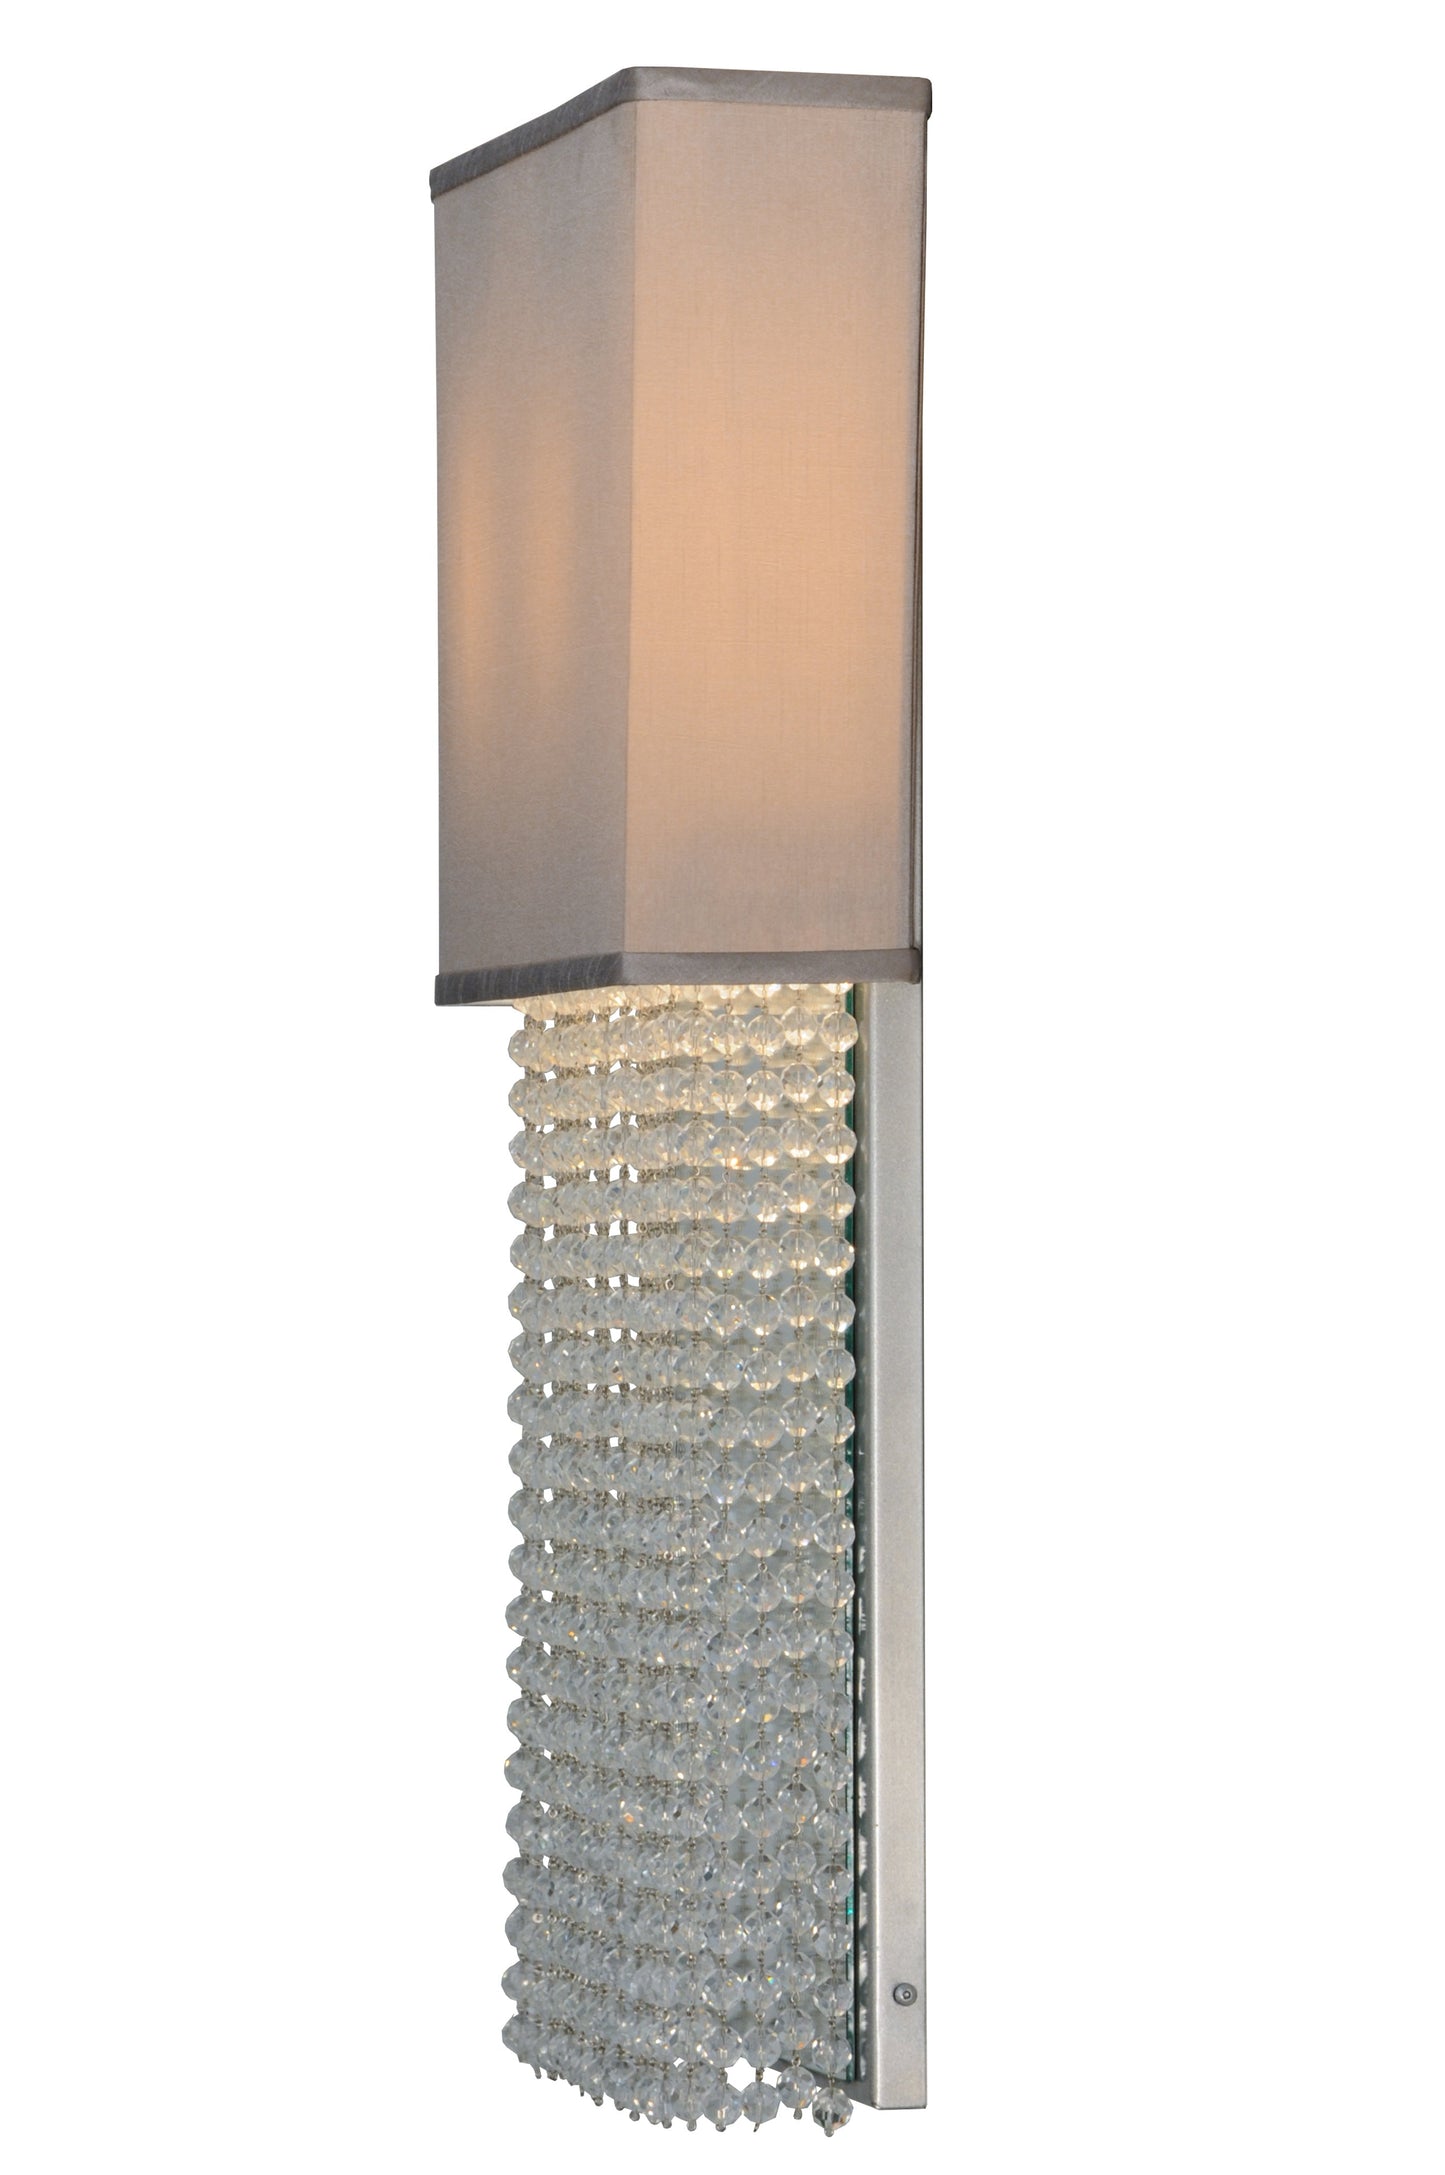 15" Francesca Wall Sconce by 2nd Ave Lighting